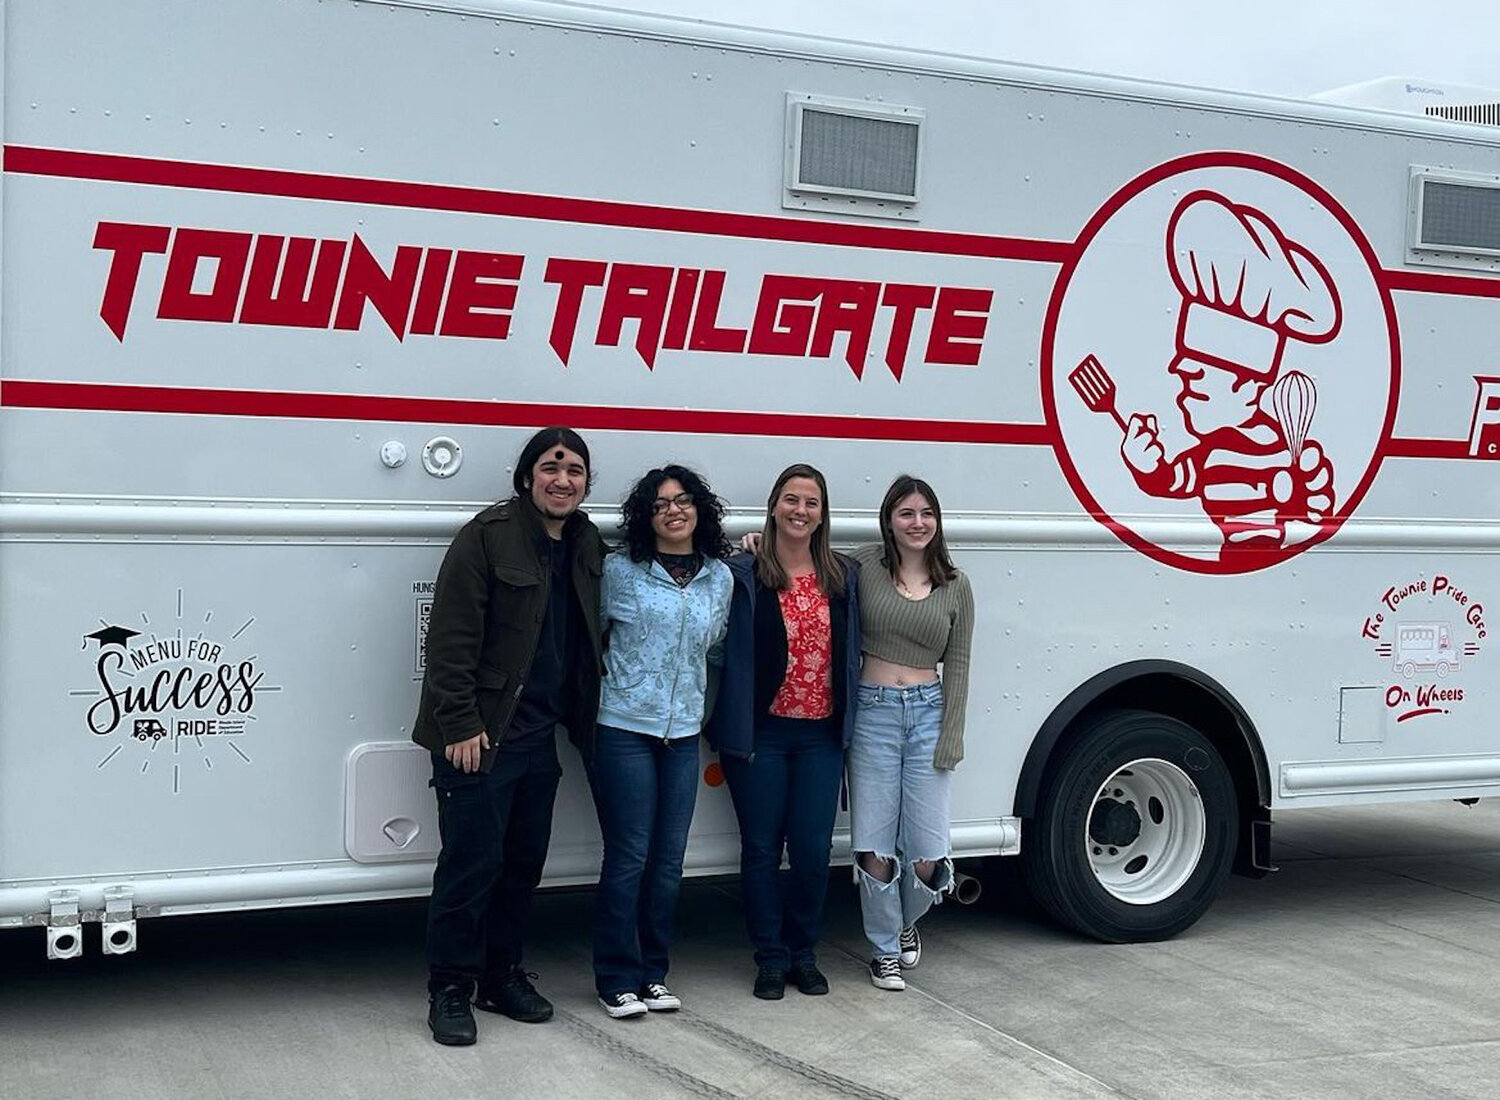 CTC Graphic Department students in the class of instructor Delia Nelson (center) created the truck wrap featuring EPHS mascot "Joe Townie."